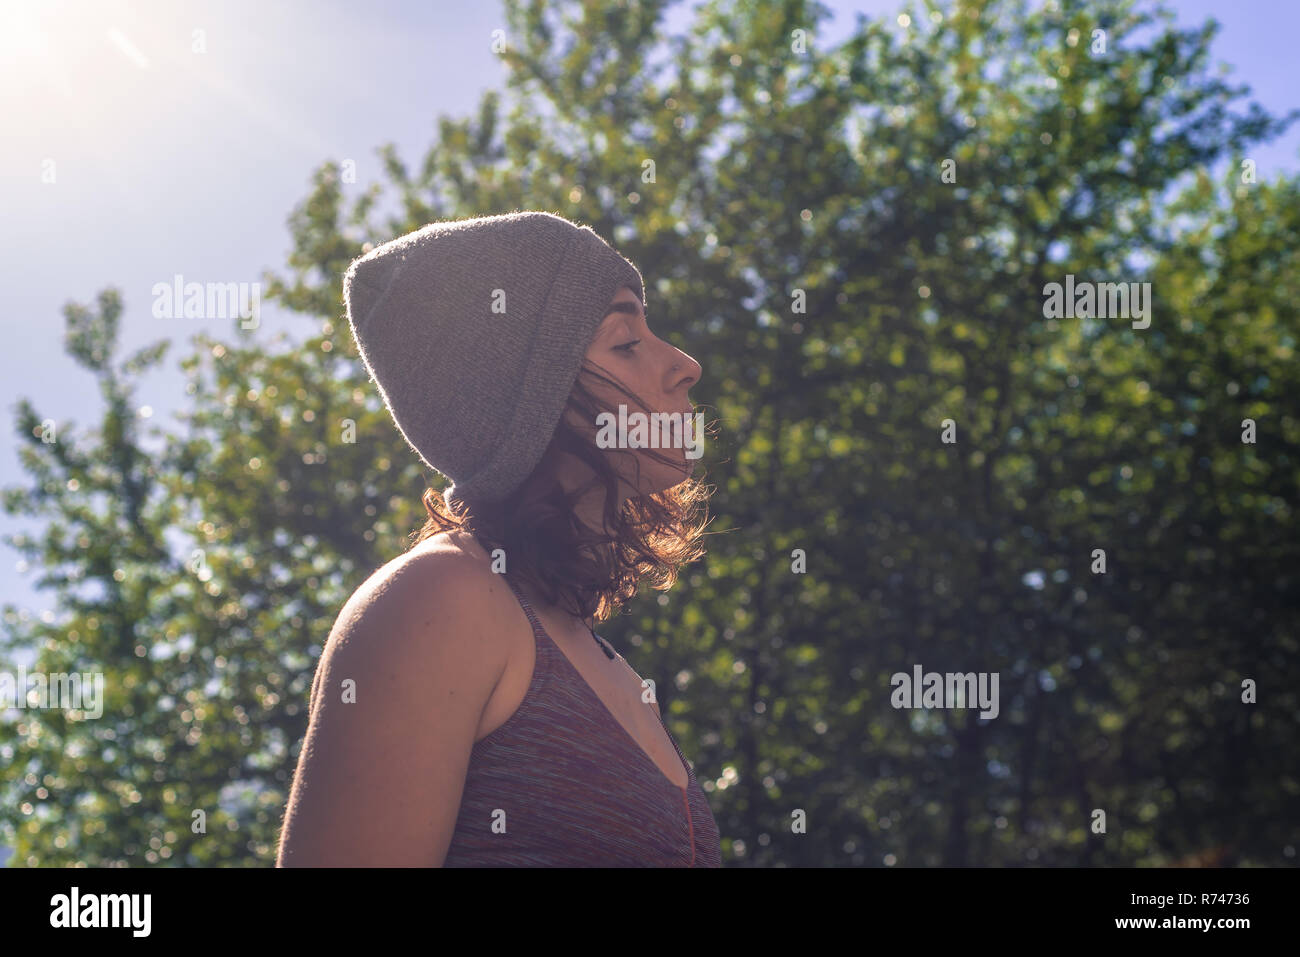 Young woman in knitted hat contemplating in front of tree foliage, backlit head and shoulder profile Stock Photo